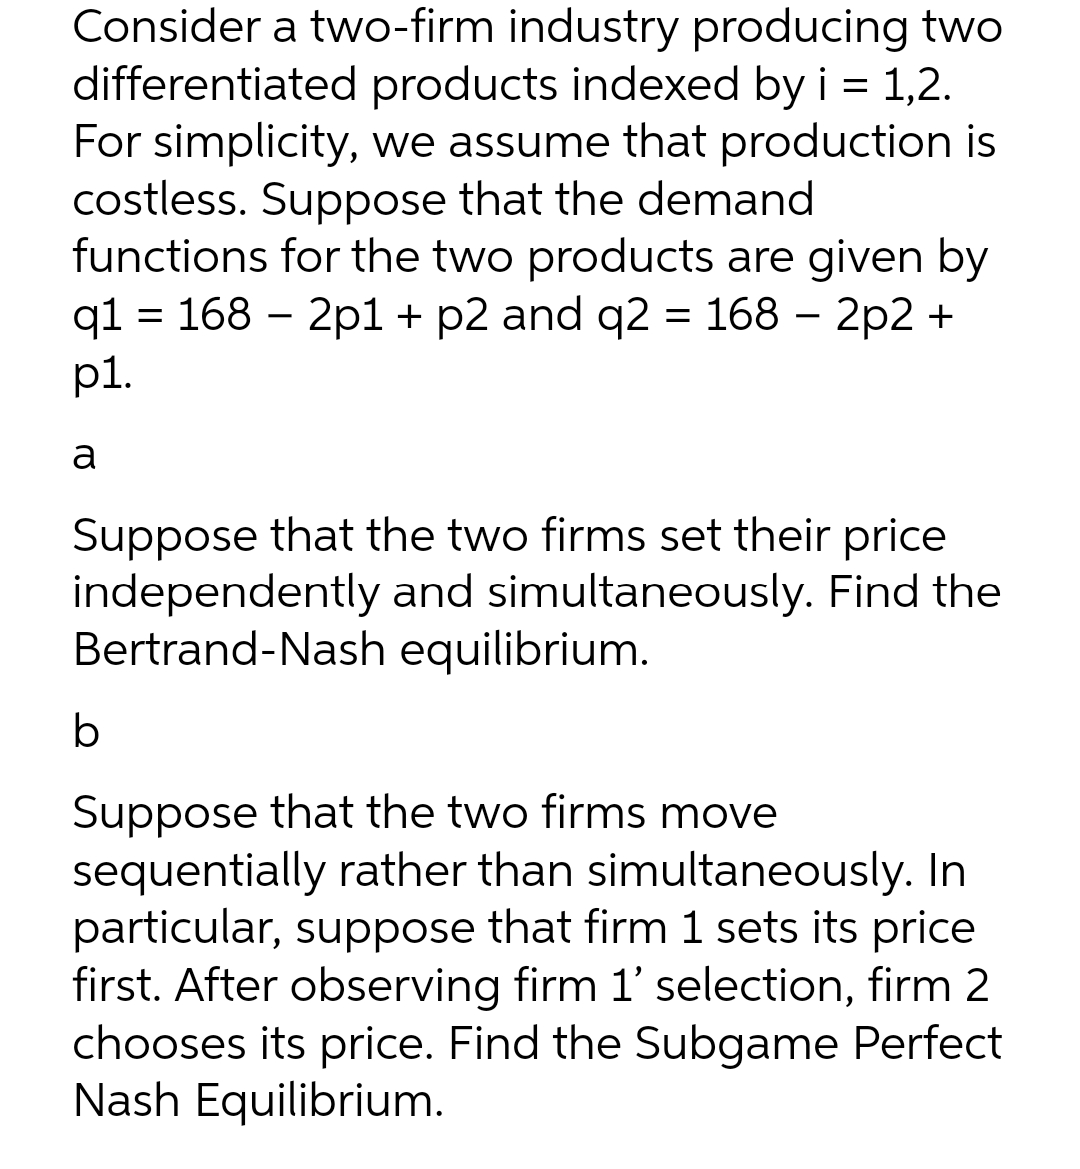 Consider a two-firm industry producing two
differentiated products indexed by i = 1,2.
For simplicity, we assume that production is
costless. Suppose that the demand
functions for the two products are given by
q1 = 168 2p1 + p2 and q2 = 168 - 2p2 +
p1.
a
Suppose that the two firms set their price
independently and simultaneously. Find the
Bertrand-Nash equilibrium.
b
Suppose that the two firms move
sequentially rather than simultaneously. In
particular, suppose that firm 1 sets its price
first. After observing firm 1' selection, firm 2
chooses its price. Find the Subgame Perfect
Nash Equilibrium.